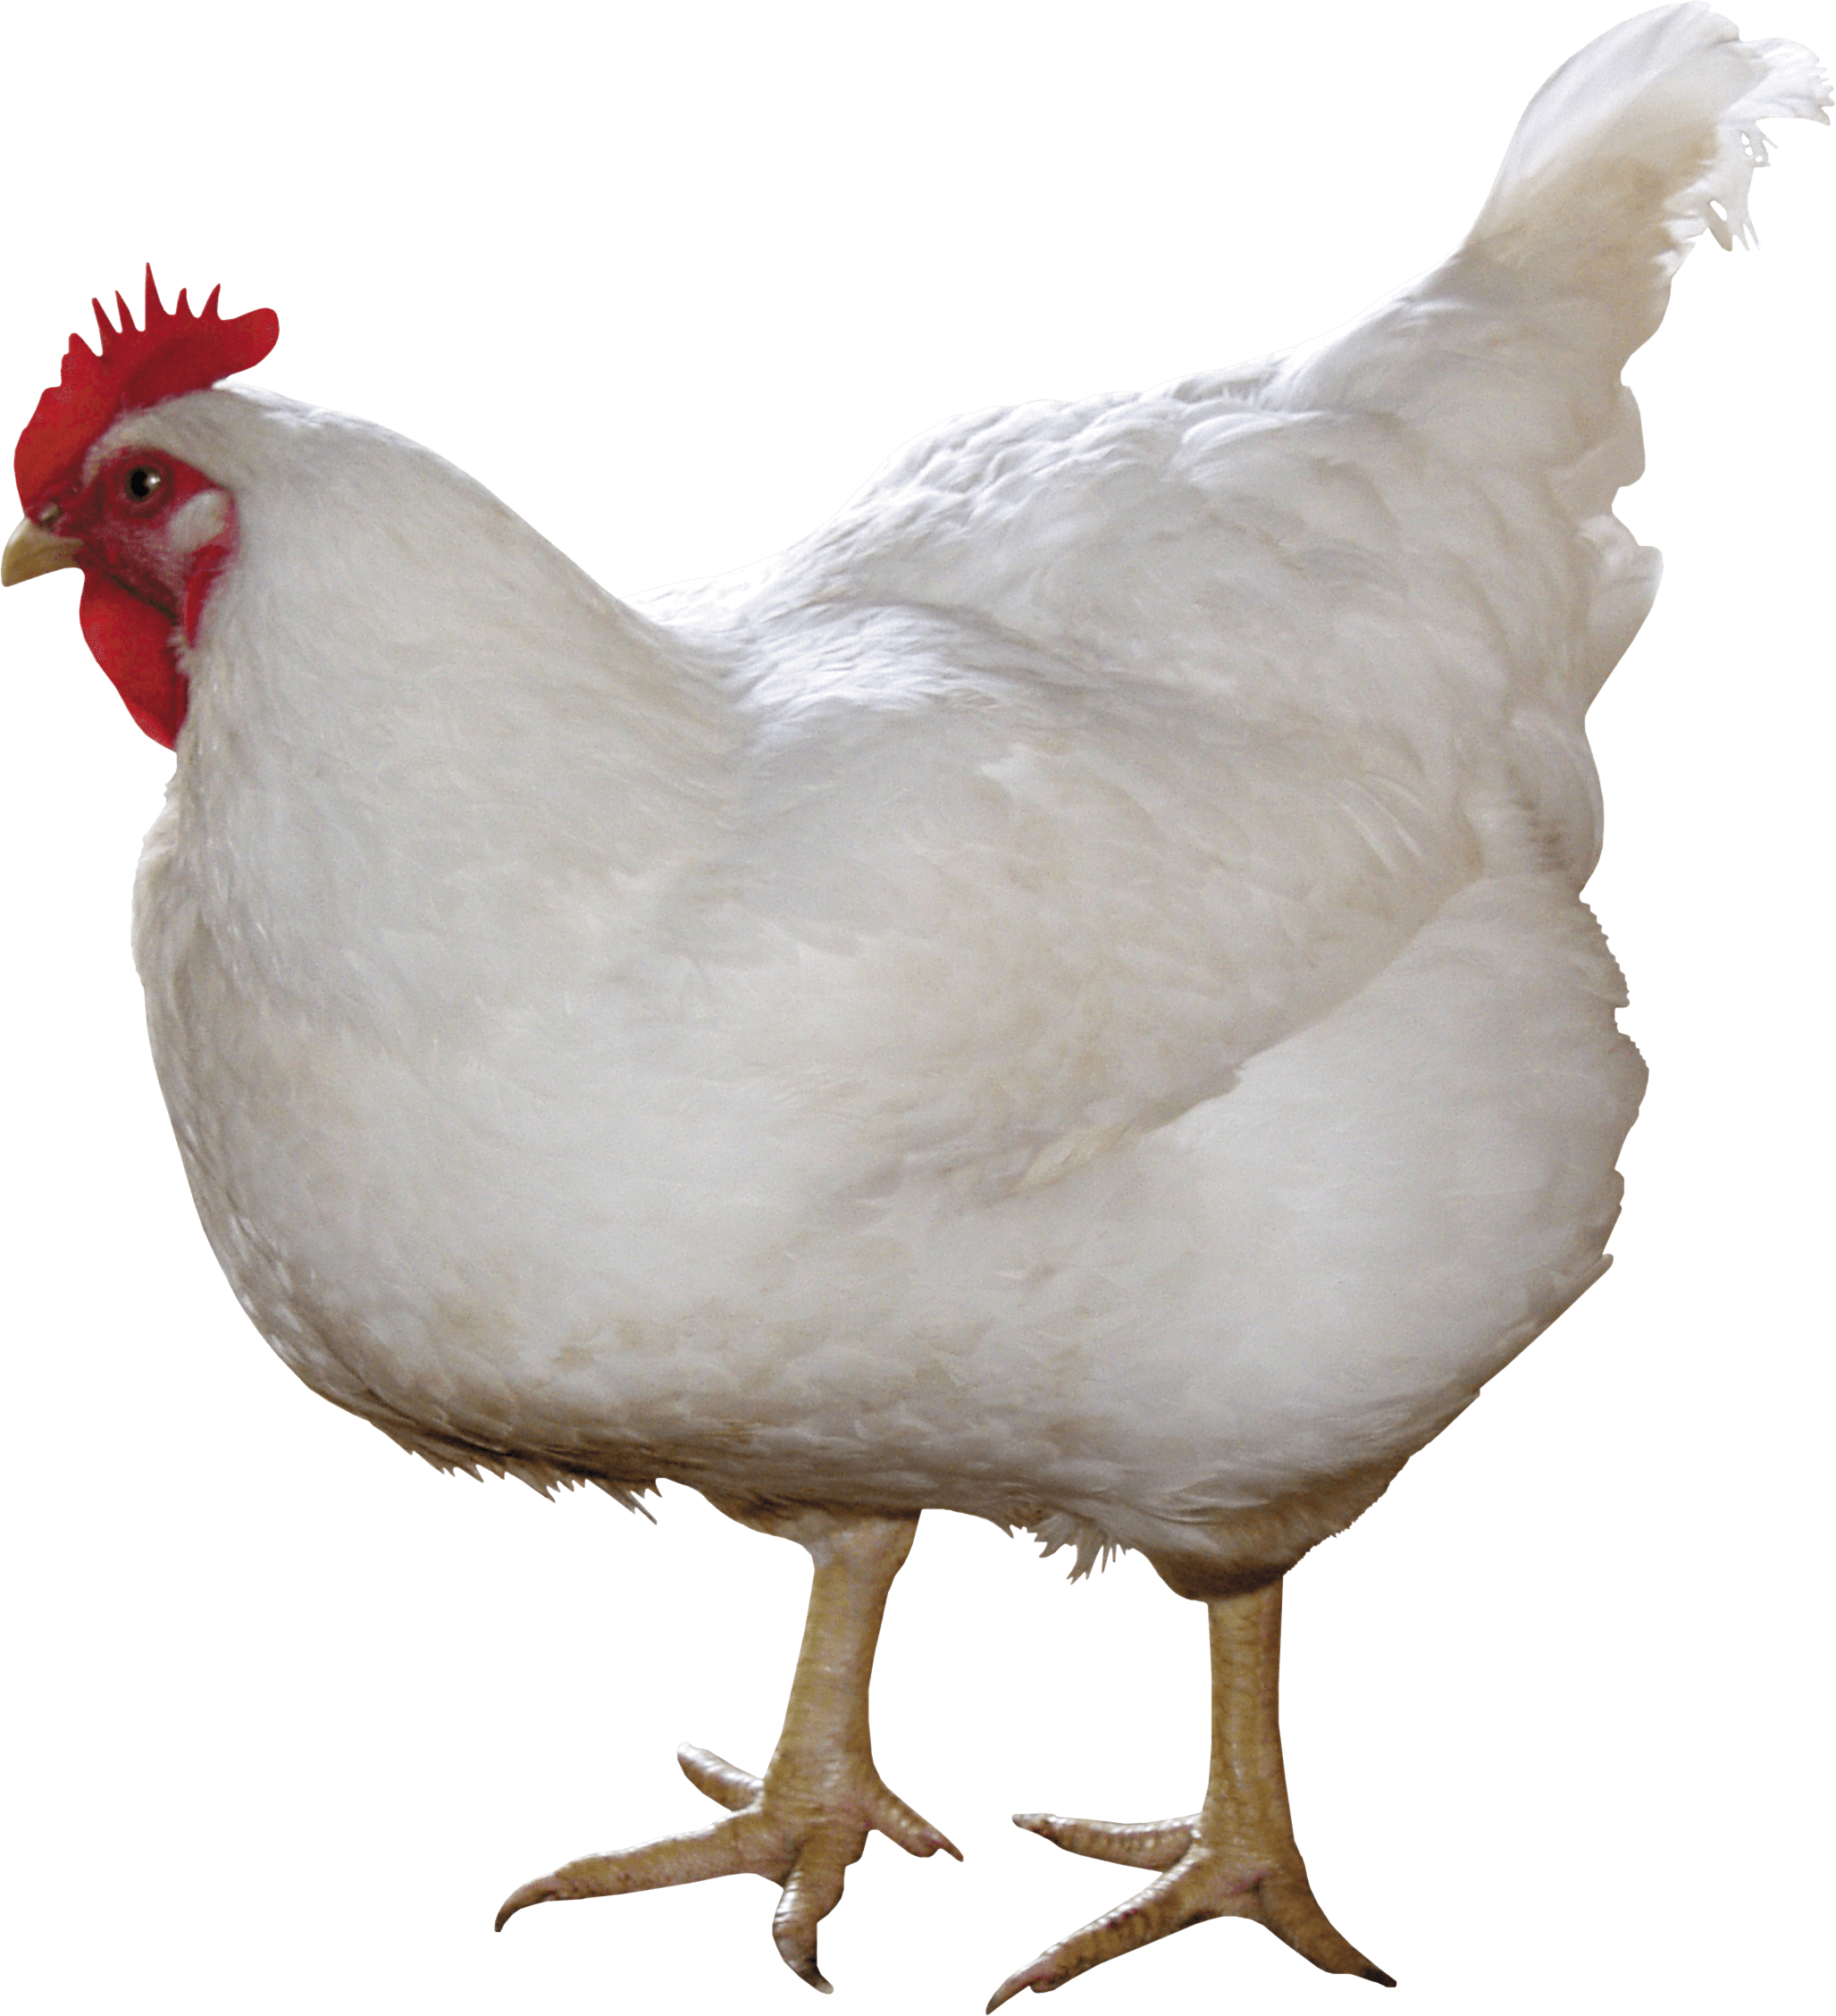 Chicken Image PNG Image